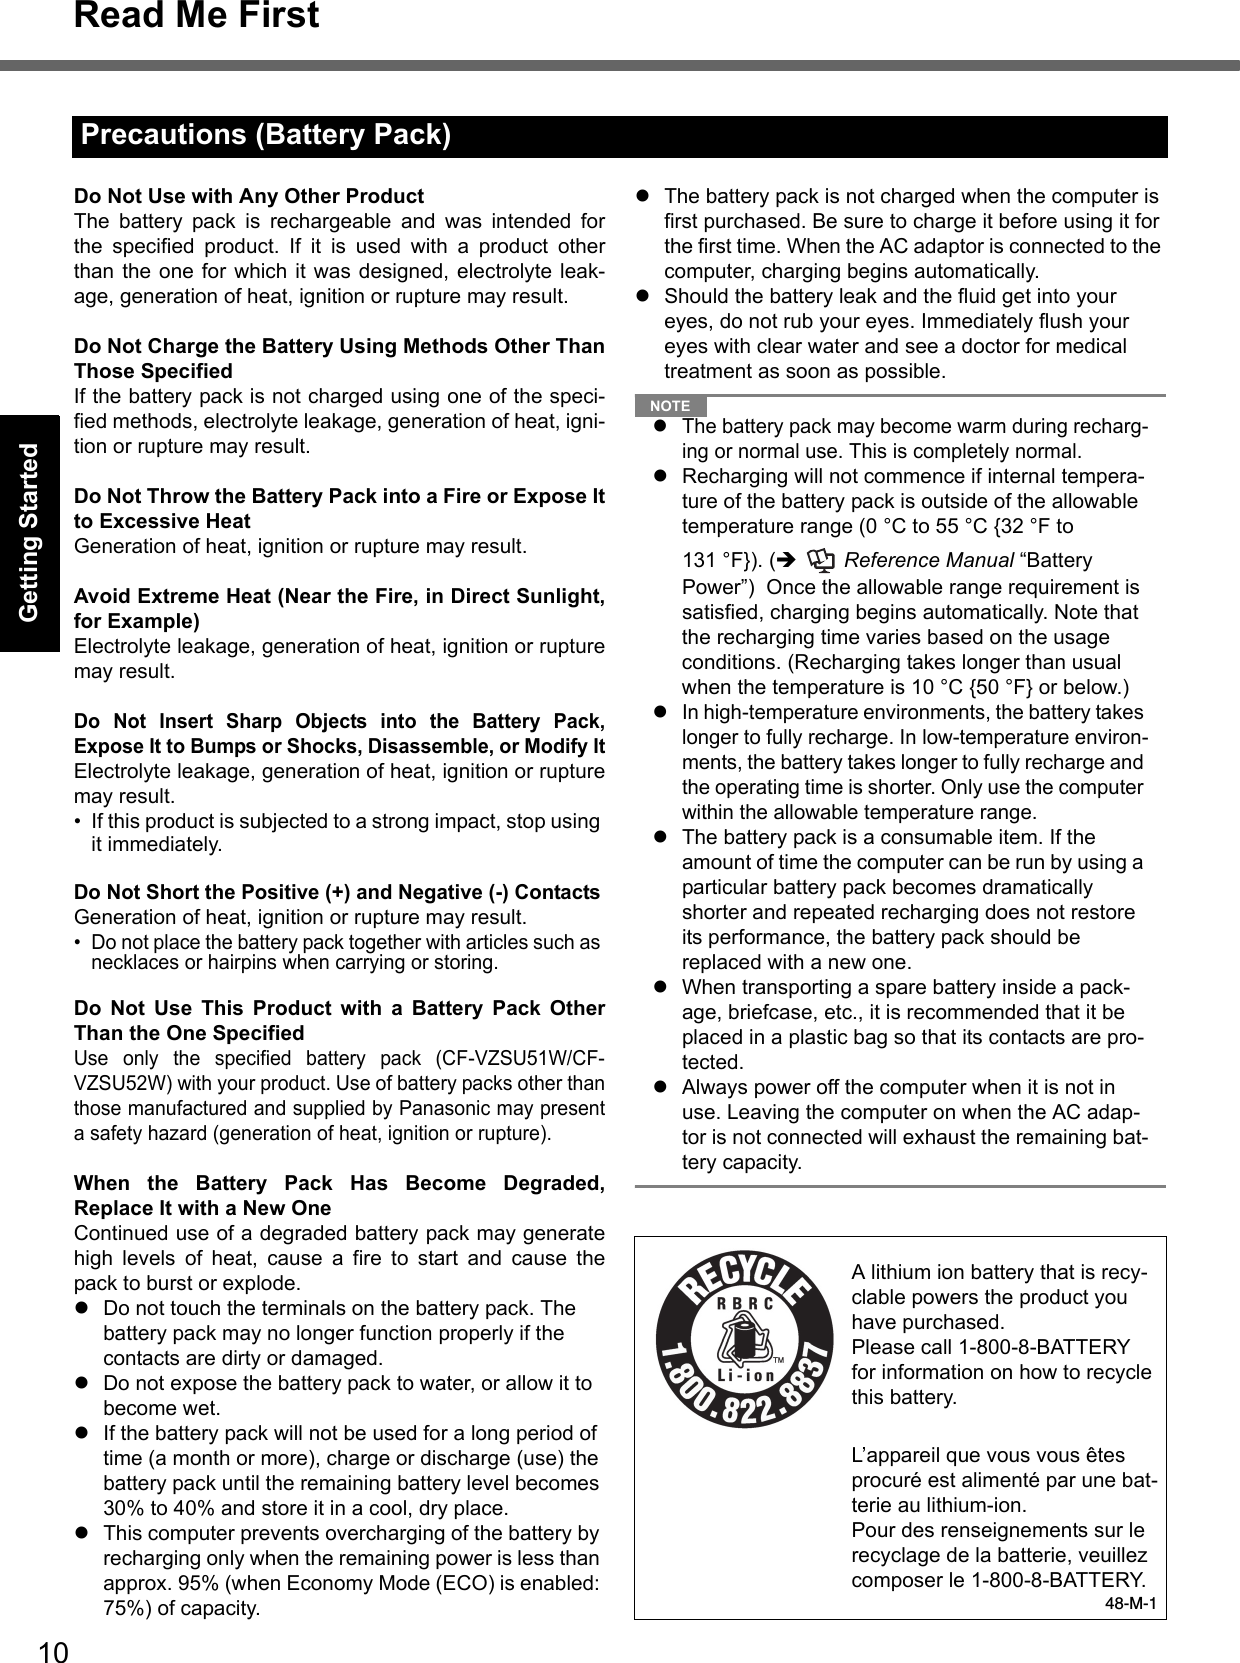 10Read Me FirstGetting StartedUseful InformationTroubleshootingAppendixDo Not Use with Any Other ProductThe battery pack is rechargeable and was intended forthe specified product. If it is used with a product otherthan the one for which it was designed, electrolyte leak-age, generation of heat, ignition or rupture may result.Do Not Charge the Battery Using Methods Other ThanThose SpecifiedIf the battery pack is not charged using one of the speci-fied methods, electrolyte leakage, generation of heat, igni-tion or rupture may result.Do Not Throw the Battery Pack into a Fire or Expose Itto Excessive HeatGeneration of heat, ignition or rupture may result.Avoid Extreme Heat (Near the Fire, in Direct Sunlight,for Example)Electrolyte leakage, generation of heat, ignition or rupturemay result.Do Not Insert Sharp Objects into the Battery Pack,Expose It to Bumps or Shocks, Disassemble, or Modify ItElectrolyte leakage, generation of heat, ignition or rupturemay result.• If this product is subjected to a strong impact, stop using it immediately.Do Not Short the Positive (+) and Negative (-) ContactsGeneration of heat, ignition or rupture may result. • Do not place the battery pack together with articles such as necklaces or hairpins when carrying or storing.Do Not Use This Product with a Battery Pack OtherThan the One SpecifiedUse only the specified battery pack (CF-VZSU51W/CF-VZSU52W) with your product. Use of battery packs other thanthose manufactured and supplied by Panasonic may presenta safety hazard (generation of heat, ignition or rupture).When the Battery Pack Has Become Degraded,Replace It with a New OneContinued use of a degraded battery pack may generatehigh levels of heat, cause a fire to start and cause thepack to burst or explode.zDo not touch the terminals on the battery pack. The battery pack may no longer function properly if the contacts are dirty or damaged.zDo not expose the battery pack to water, or allow it to become wet.zIf the battery pack will not be used for a long period of time (a month or more), charge or discharge (use) the battery pack until the remaining battery level becomes 30% to 40% and store it in a cool, dry place.zThis computer prevents overcharging of the battery by recharging only when the remaining power is less than approx. 95% (when Economy Mode (ECO) is enabled: 75%) of capacity.zThe battery pack is not charged when the computer is first purchased. Be sure to charge it before using it for the first time. When the AC adaptor is connected to the computer, charging begins automatically.zShould the battery leak and the fluid get into your eyes, do not rub your eyes. Immediately flush your eyes with clear water and see a doctor for medical treatment as soon as possible.NOTEzThe battery pack may become warm during recharg-ing or normal use. This is completely normal.zRecharging will not commence if internal tempera-ture of the battery pack is outside of the allowable temperature range (0 °C to 55 °C {32 °F to 131 °F}). (Î  Reference Manual “Battery Power”)  Once the allowable range requirement is satisfied, charging begins automatically. Note that the recharging time varies based on the usage conditions. (Recharging takes longer than usual when the temperature is 10 °C {50 °F} or below.)zIn high-temperature environments, the battery takes longer to fully recharge. In low-temperature environ-ments, the battery takes longer to fully recharge and the operating time is shorter. Only use the computer within the allowable temperature range.zThe battery pack is a consumable item. If the amount of time the computer can be run by using a particular battery pack becomes dramatically shorter and repeated recharging does not restore its performance, the battery pack should be replaced with a new one. zWhen transporting a spare battery inside a pack-age, briefcase, etc., it is recommended that it be placed in a plastic bag so that its contacts are pro-tected.zAlways power off the computer when it is not in use. Leaving the computer on when the AC adap-tor is not connected will exhaust the remaining bat-tery capacity.Precautions (Battery Pack)A lithium ion battery that is recy-clable powers the product you have purchased.Please call 1-800-8-BATTERY for information on how to recycle this battery.L’appareil que vous vous êtes procuré est alimenté par une bat-terie au lithium-ion.Pour des renseignements sur le recyclage de la batterie, veuillez composer le 1-800-8-BATTERY.48-M-1